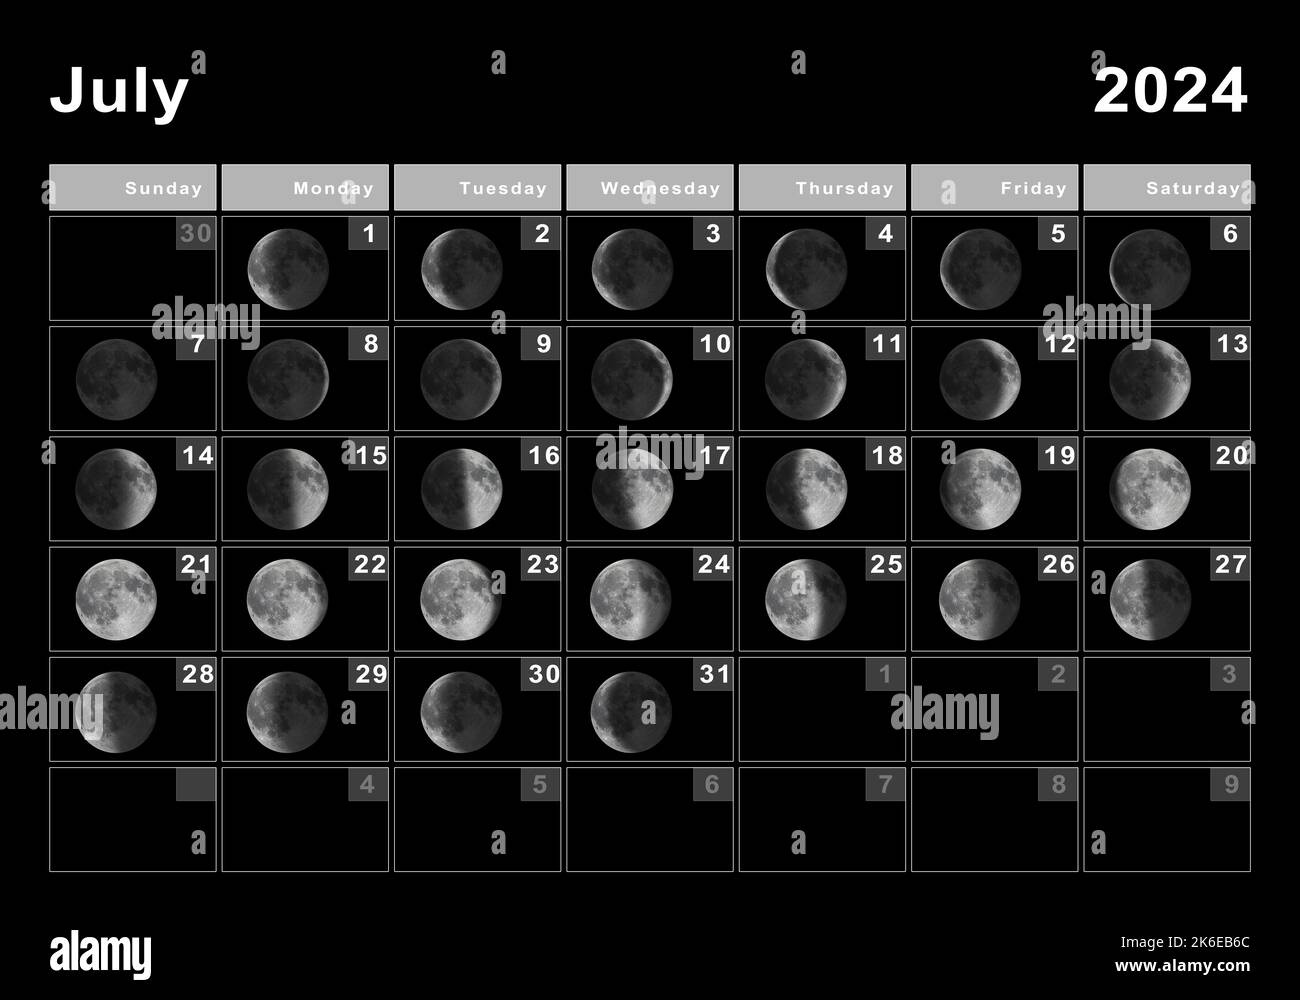 July 2024 Lunar Calendar, Moon Cycles, Moon Phases Stock Photo - Alamy pertaining to July 19th Lunar Calendar 2024